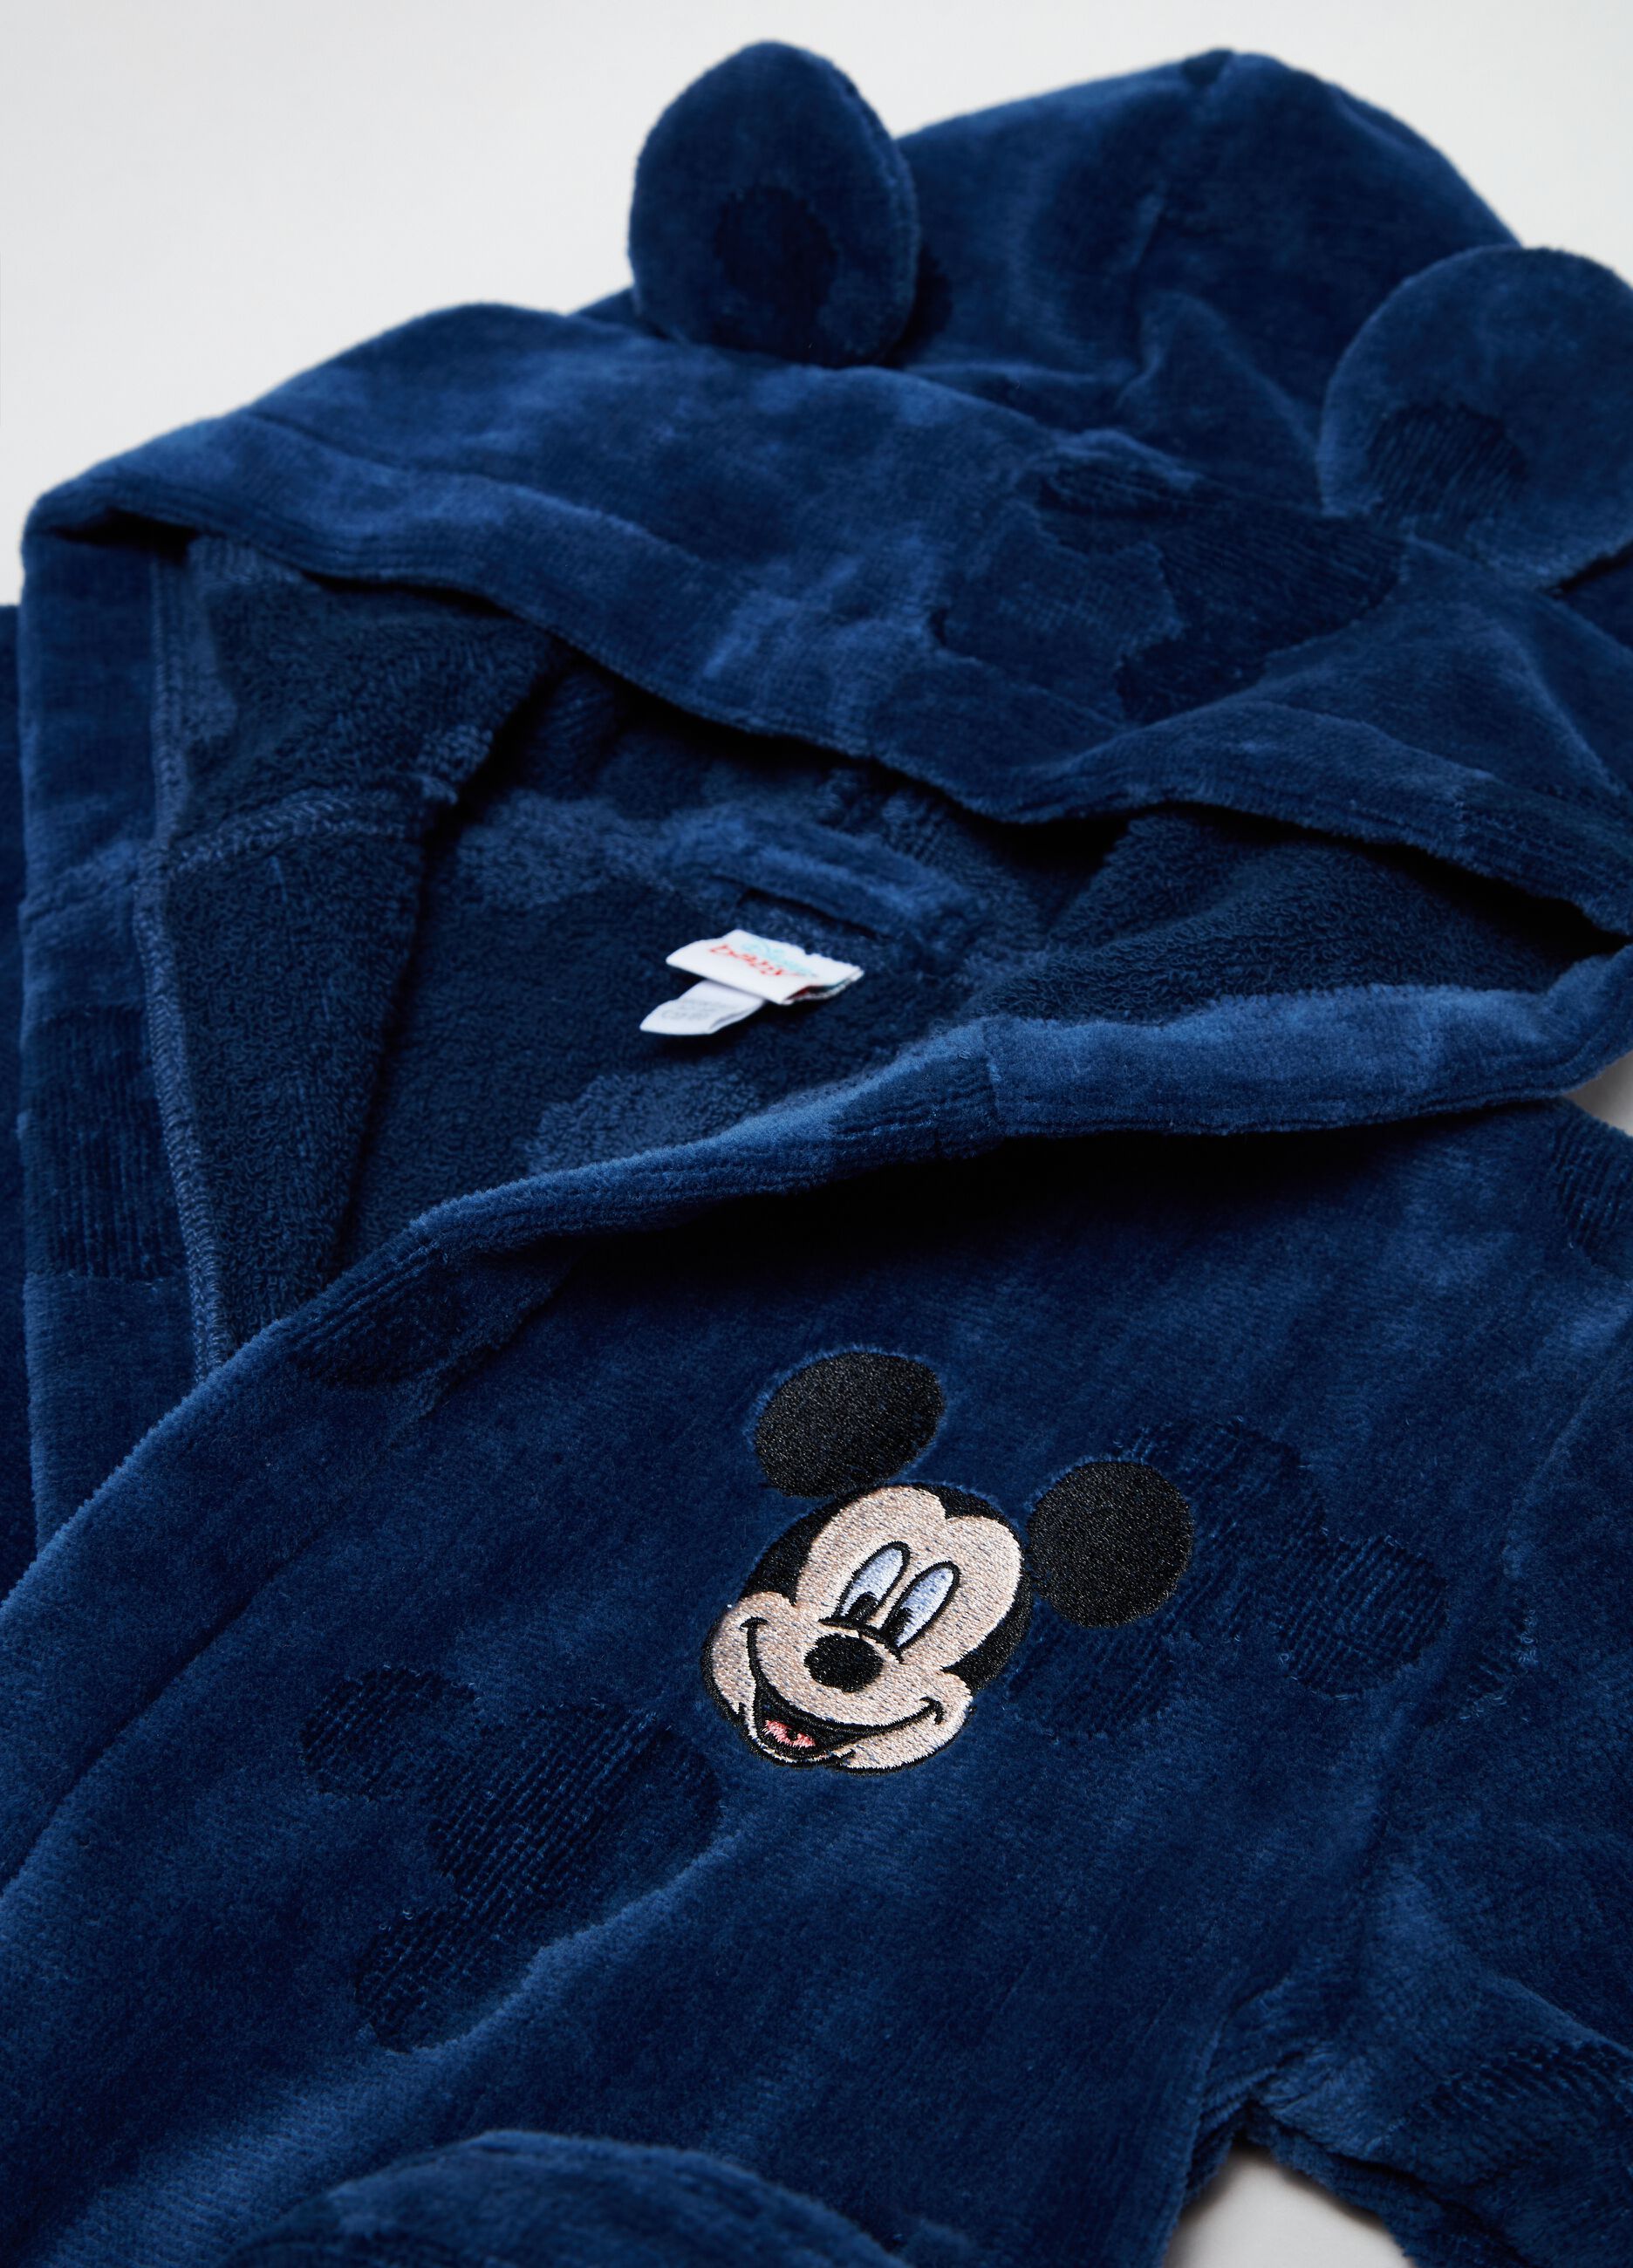 Disney Baby Mickey Mouse bathrobe with embroidery